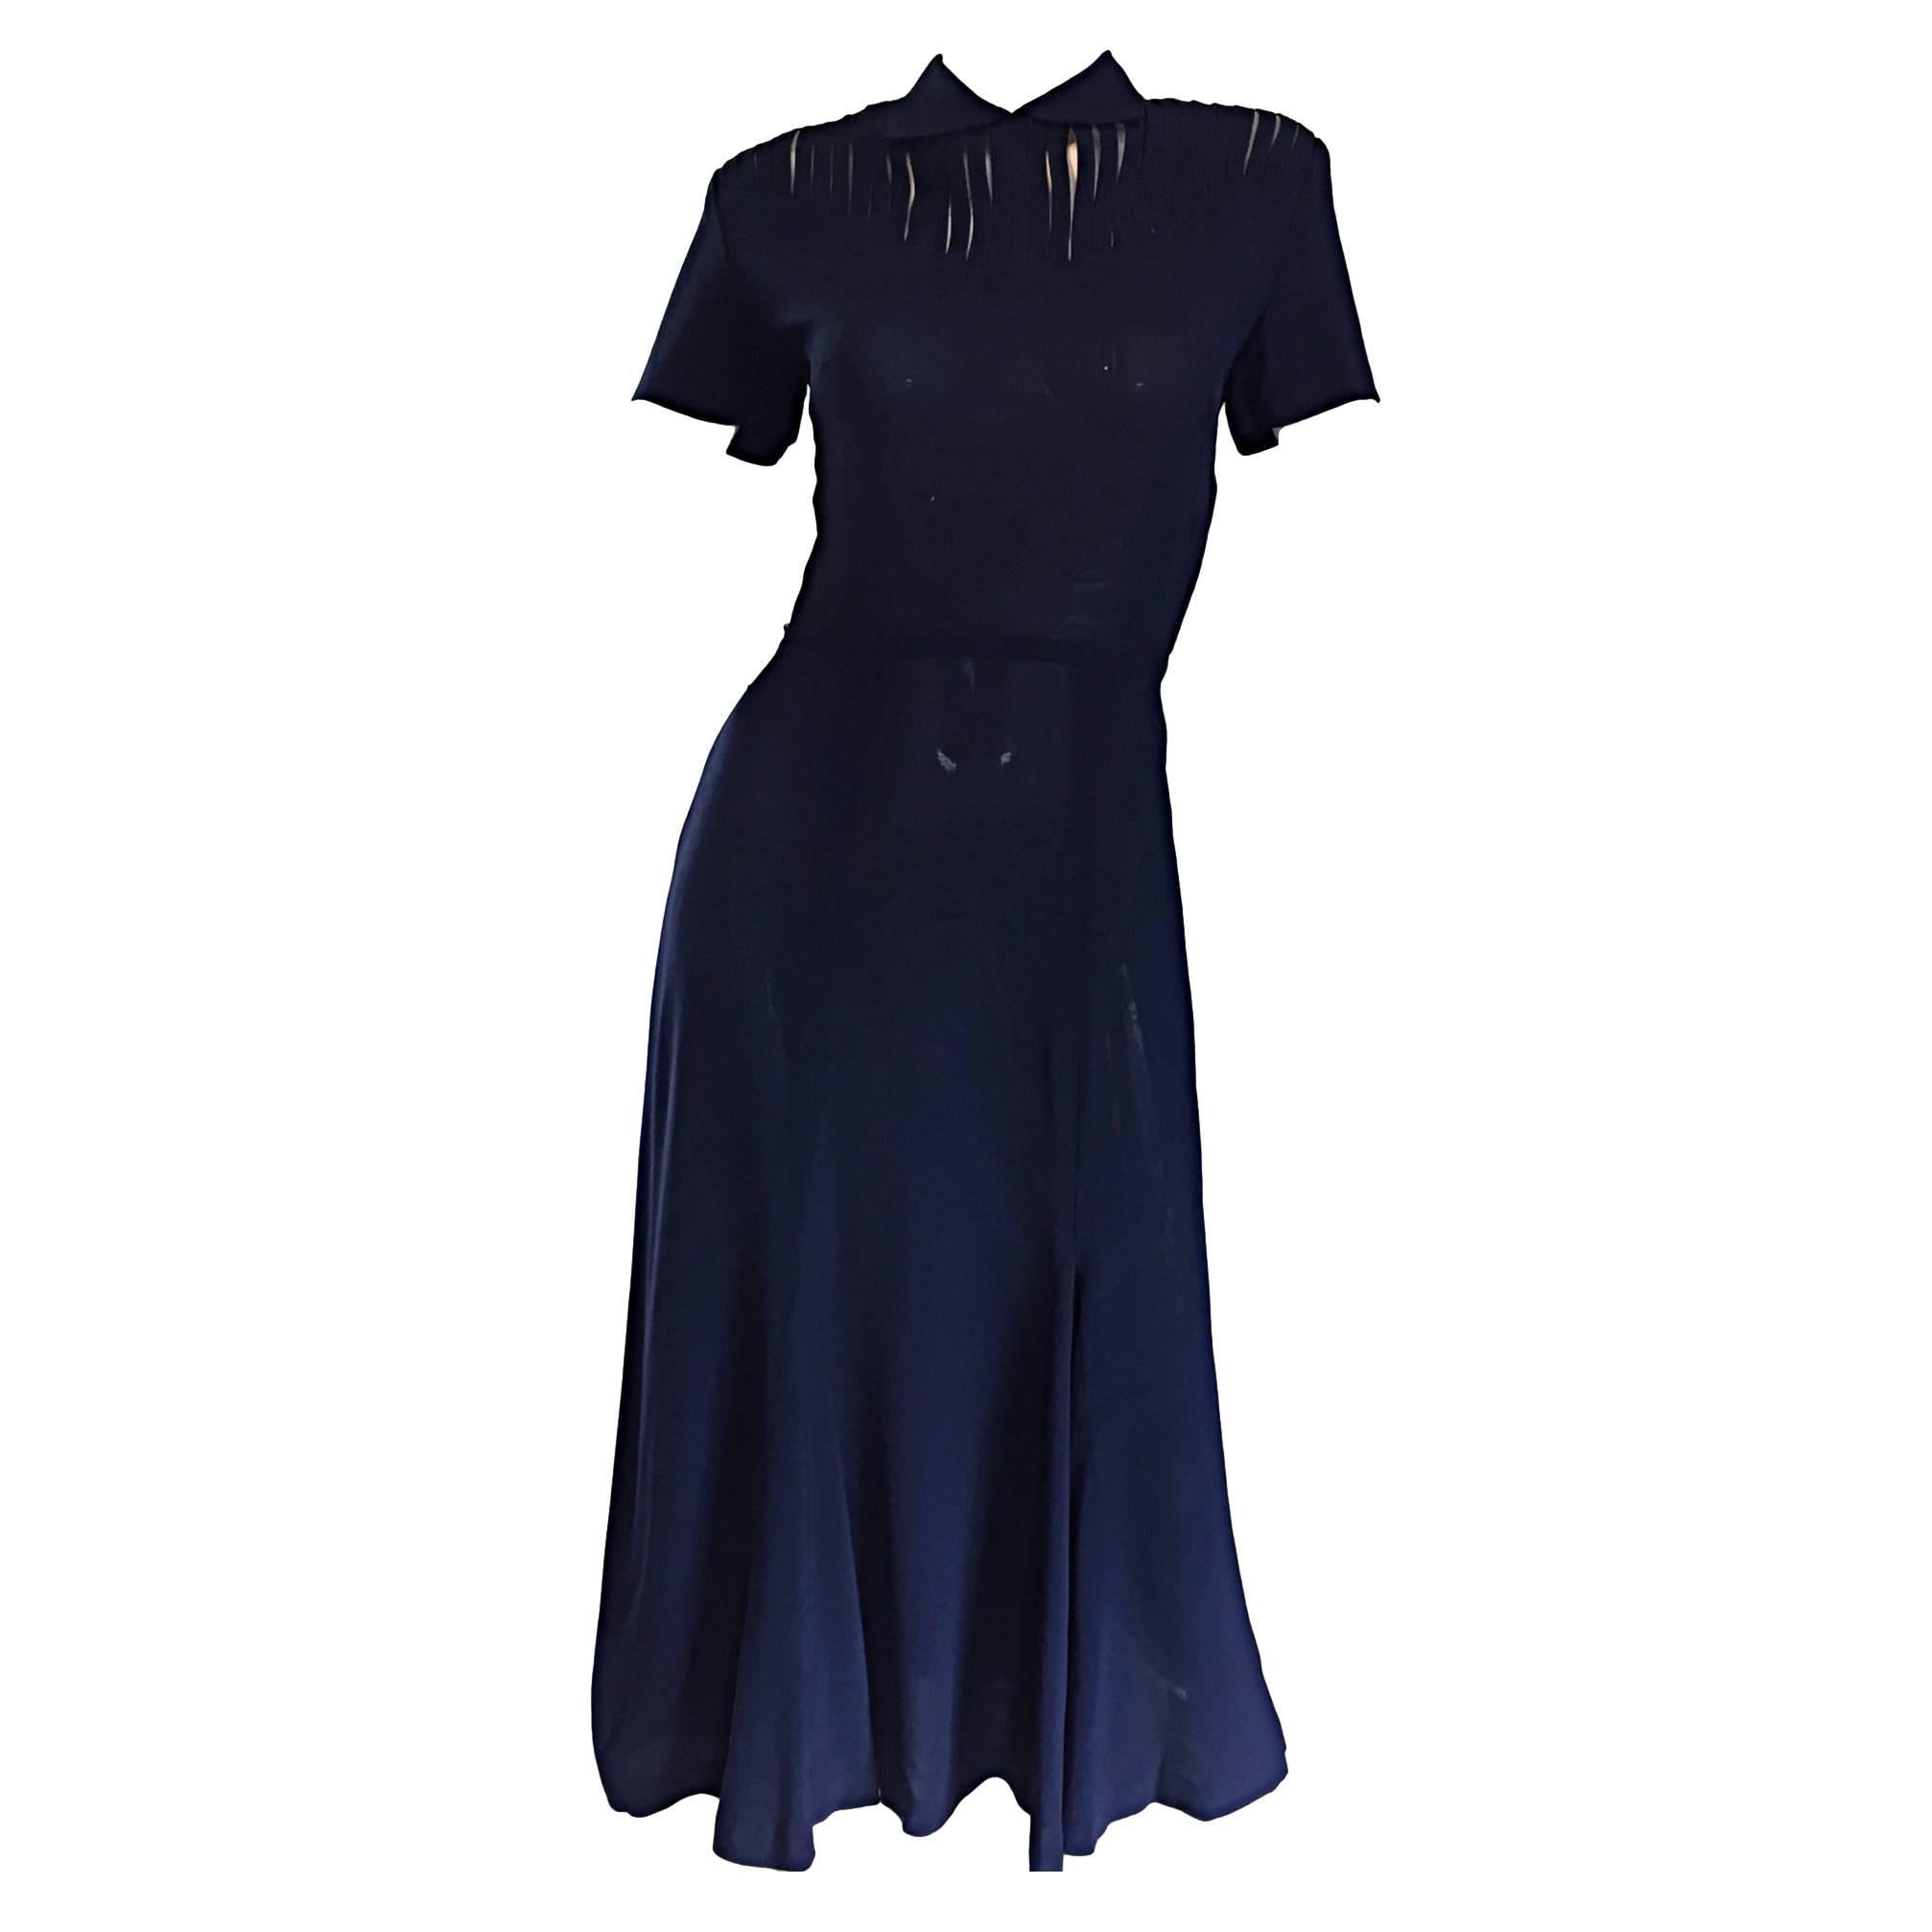 Chic 1940s 40s Navy Blue Crepe + Nude Illusion Vintage Day Dress